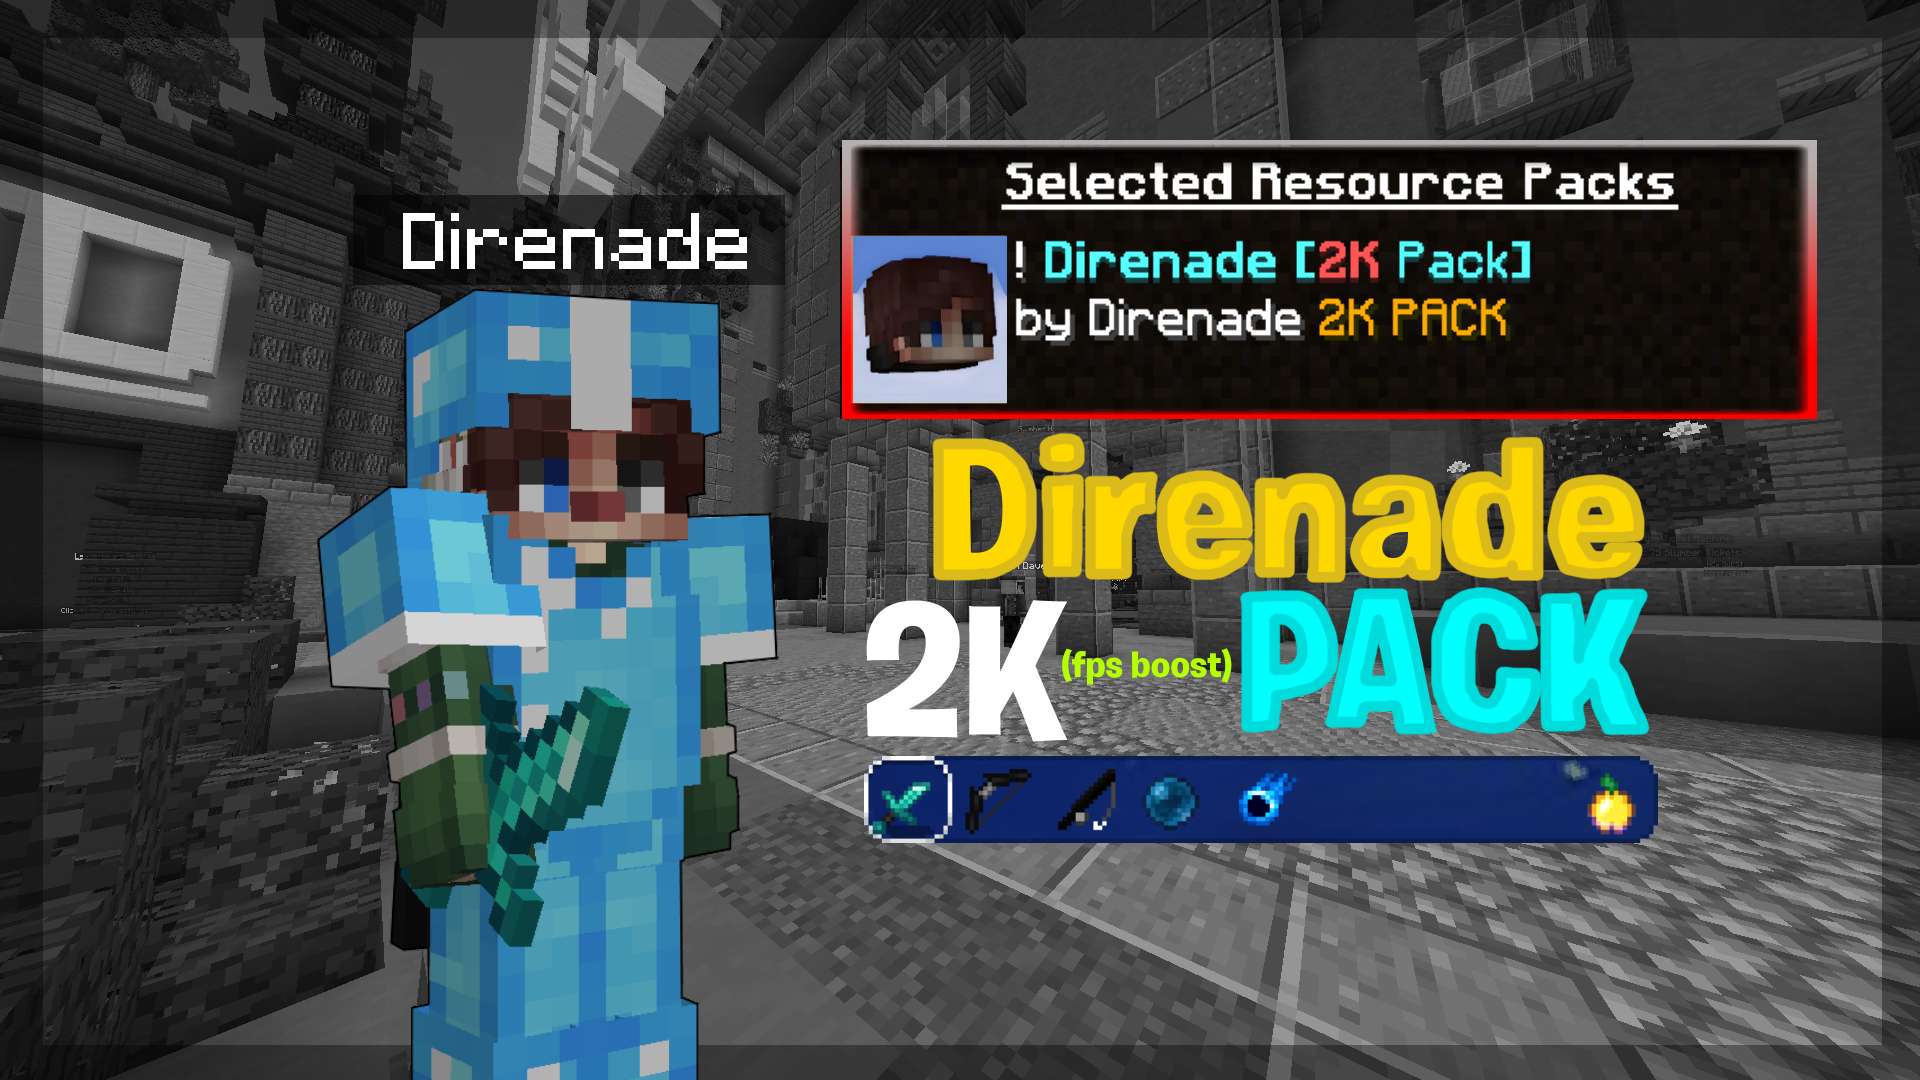 Gallery Banner for Direnade 2K Pack on PvPRP